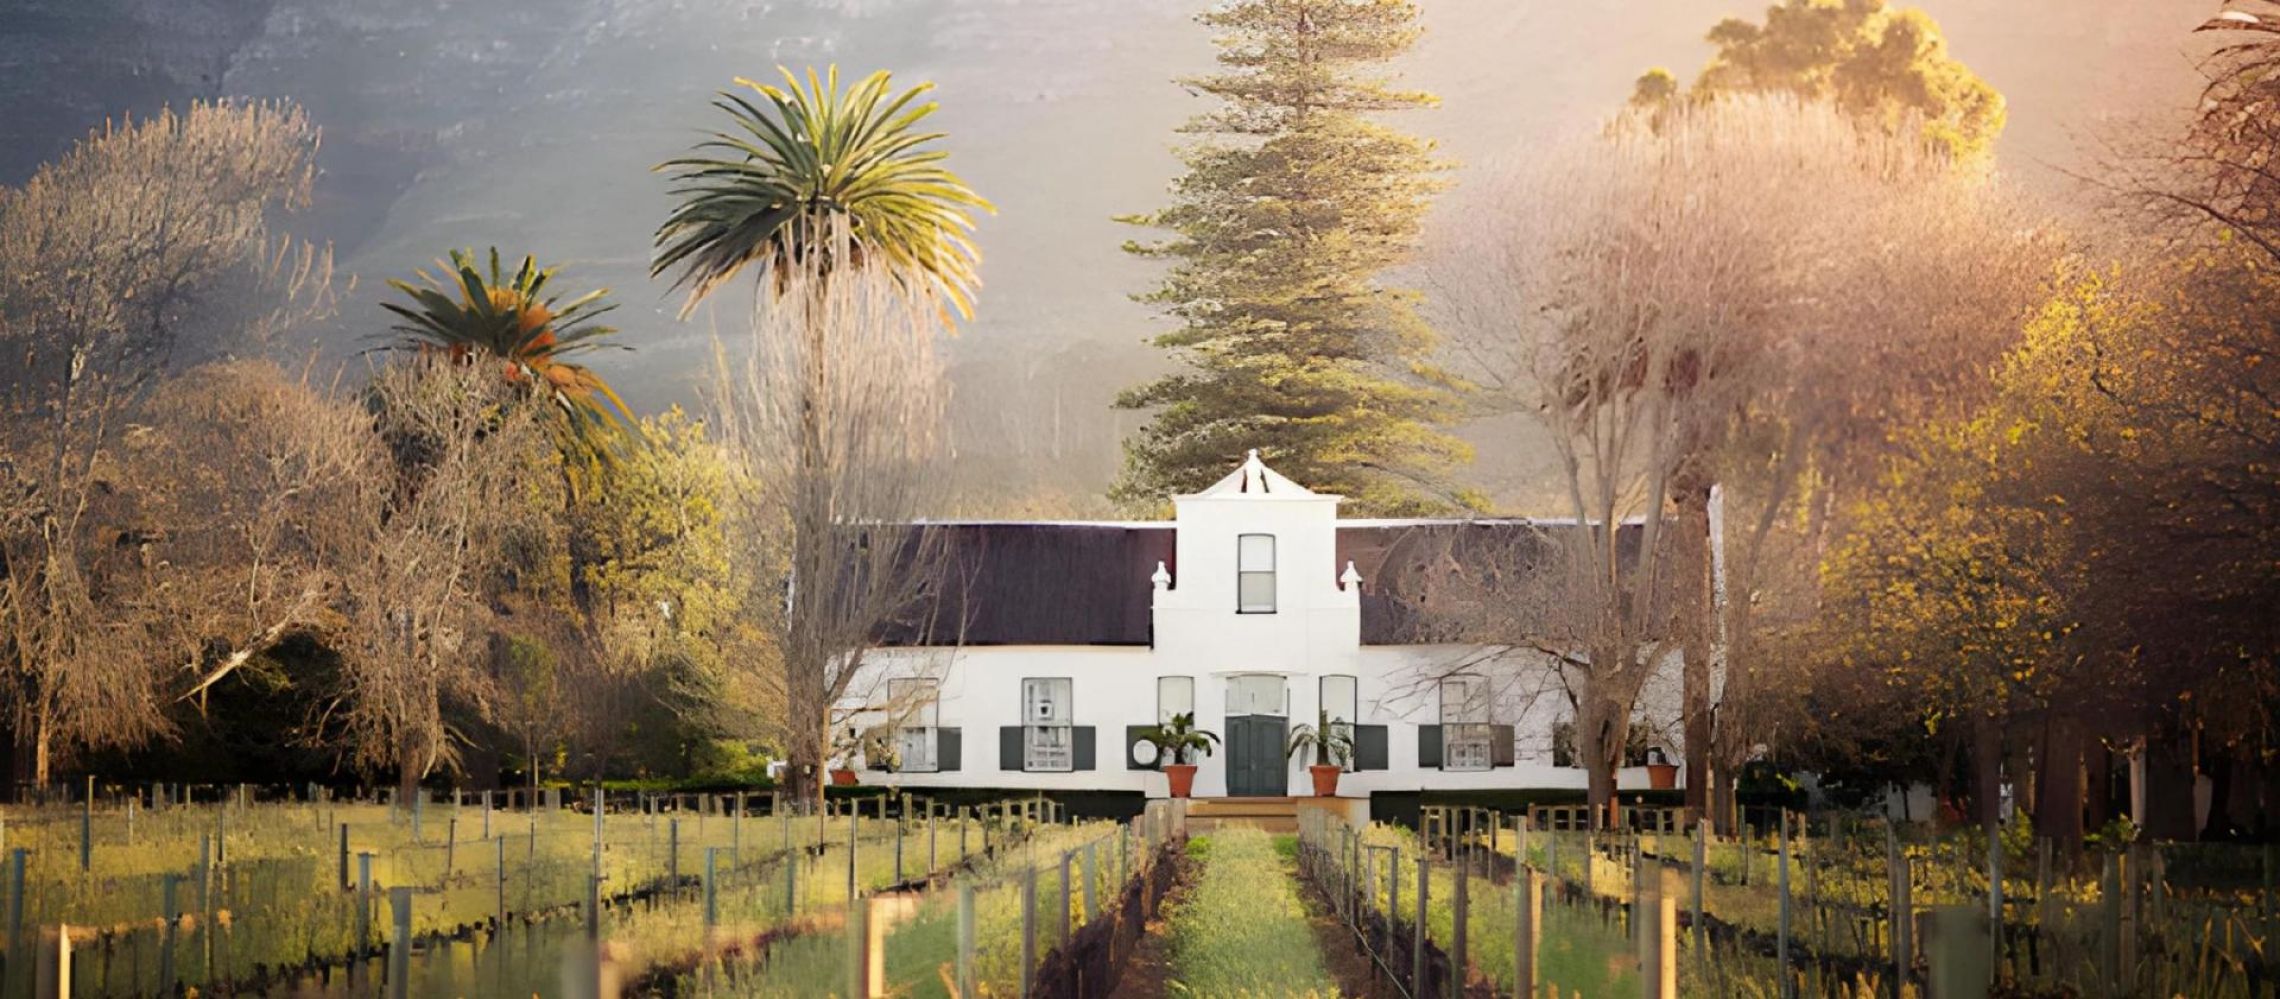 Photo for: South Africa Wine Part Two: Current Challenges Facing the Wine Industry